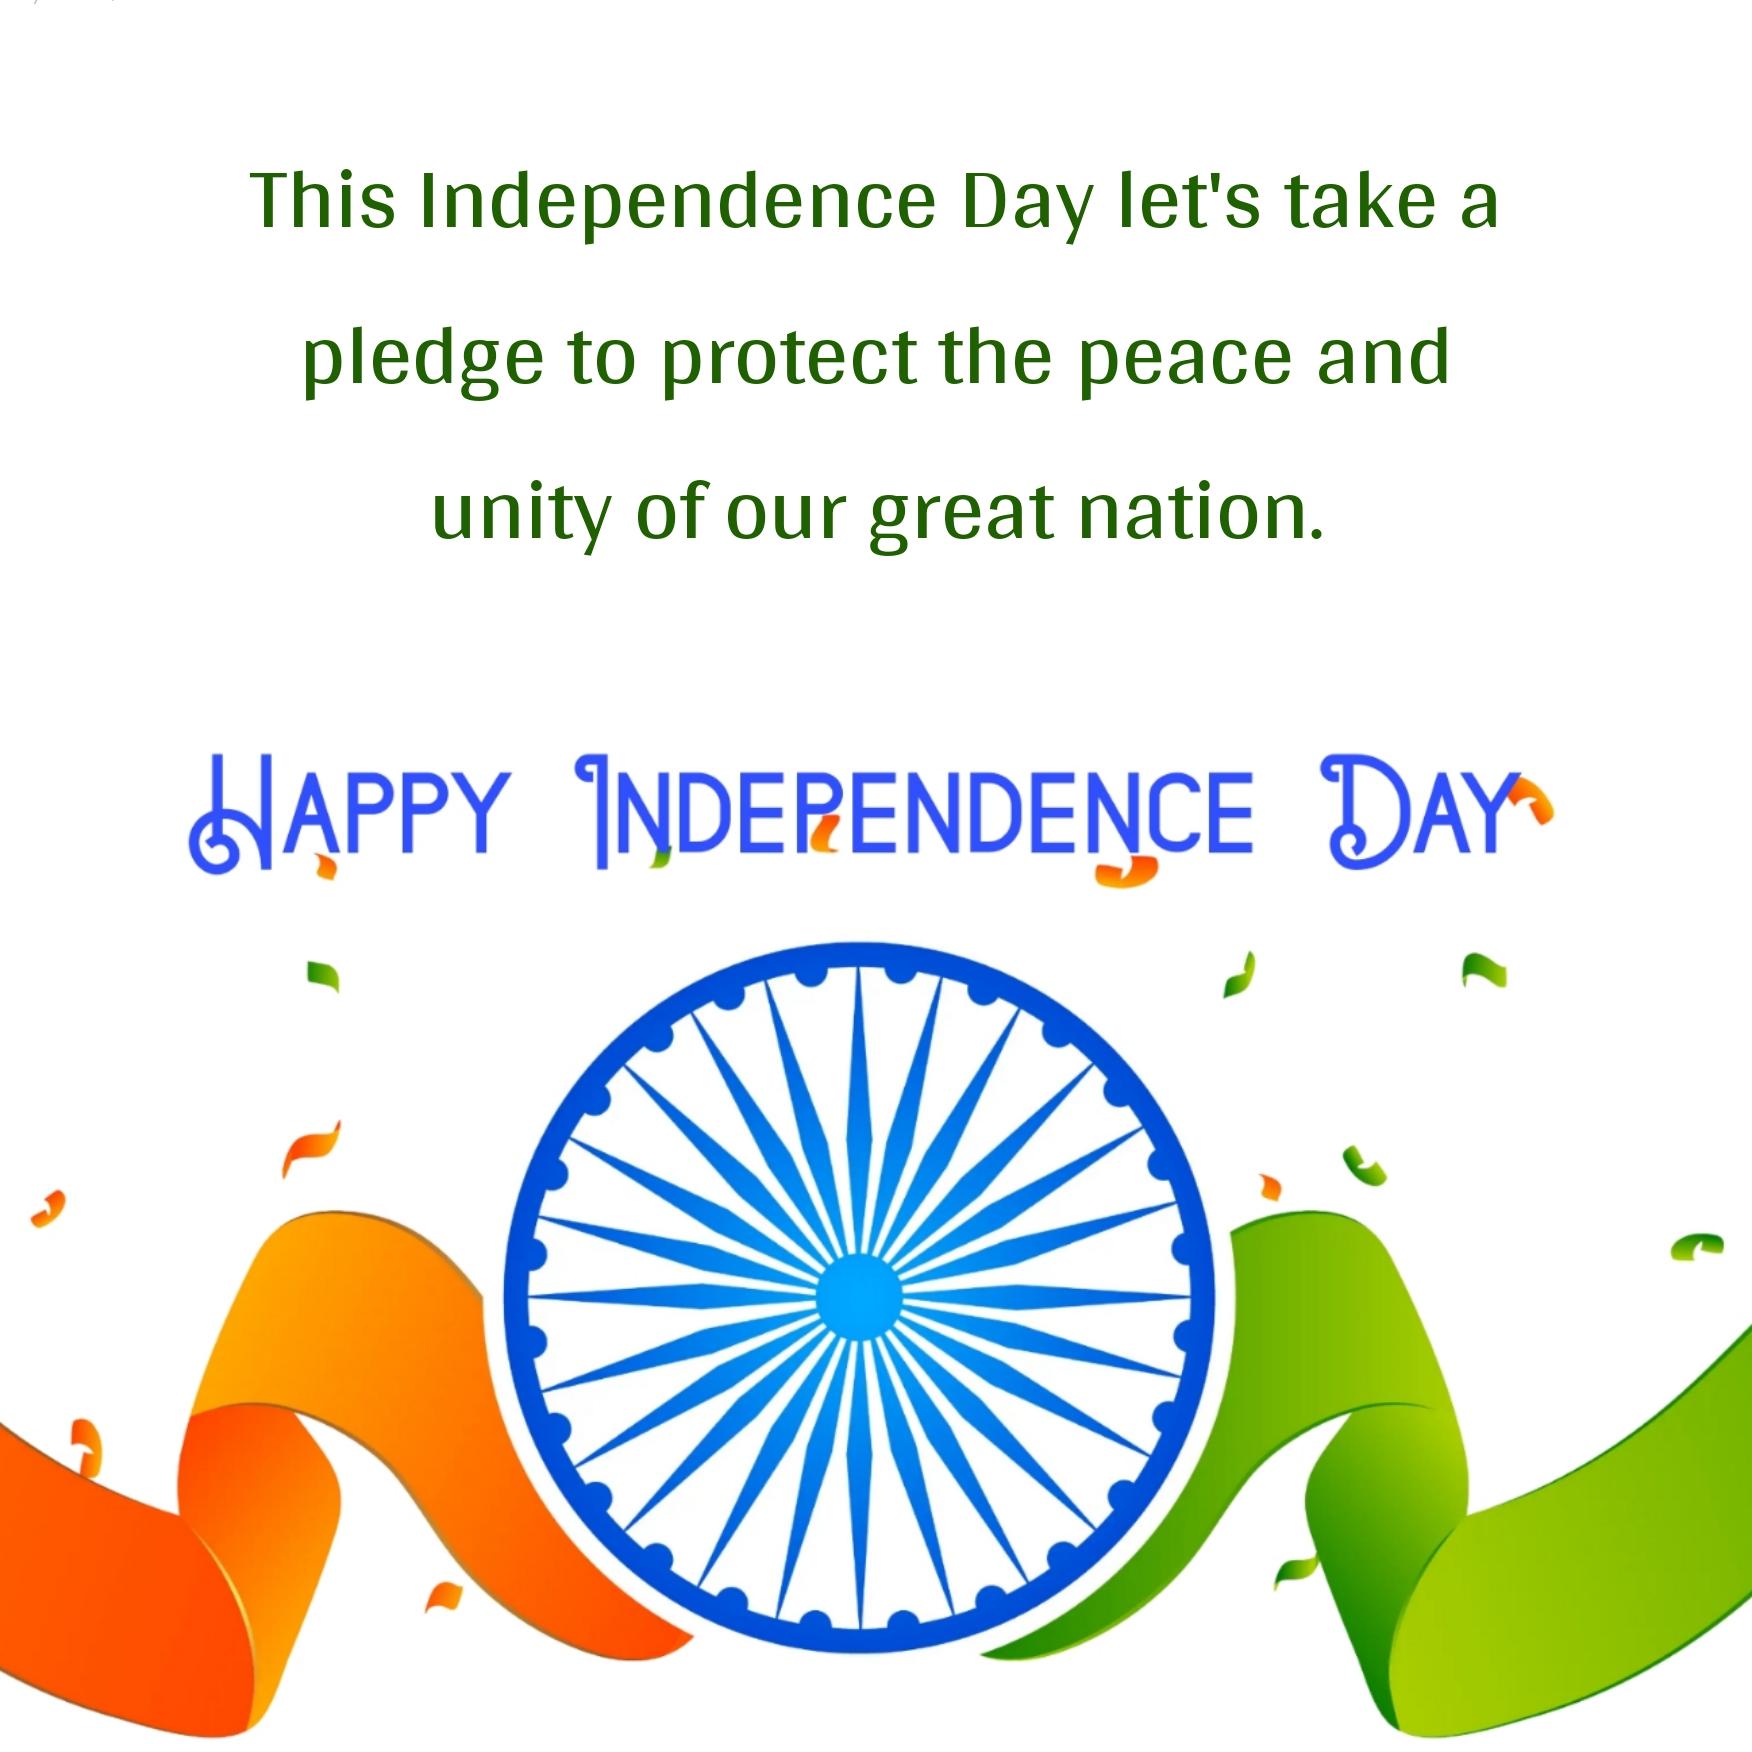 This Independence Day let's take a pledge to protect the peace